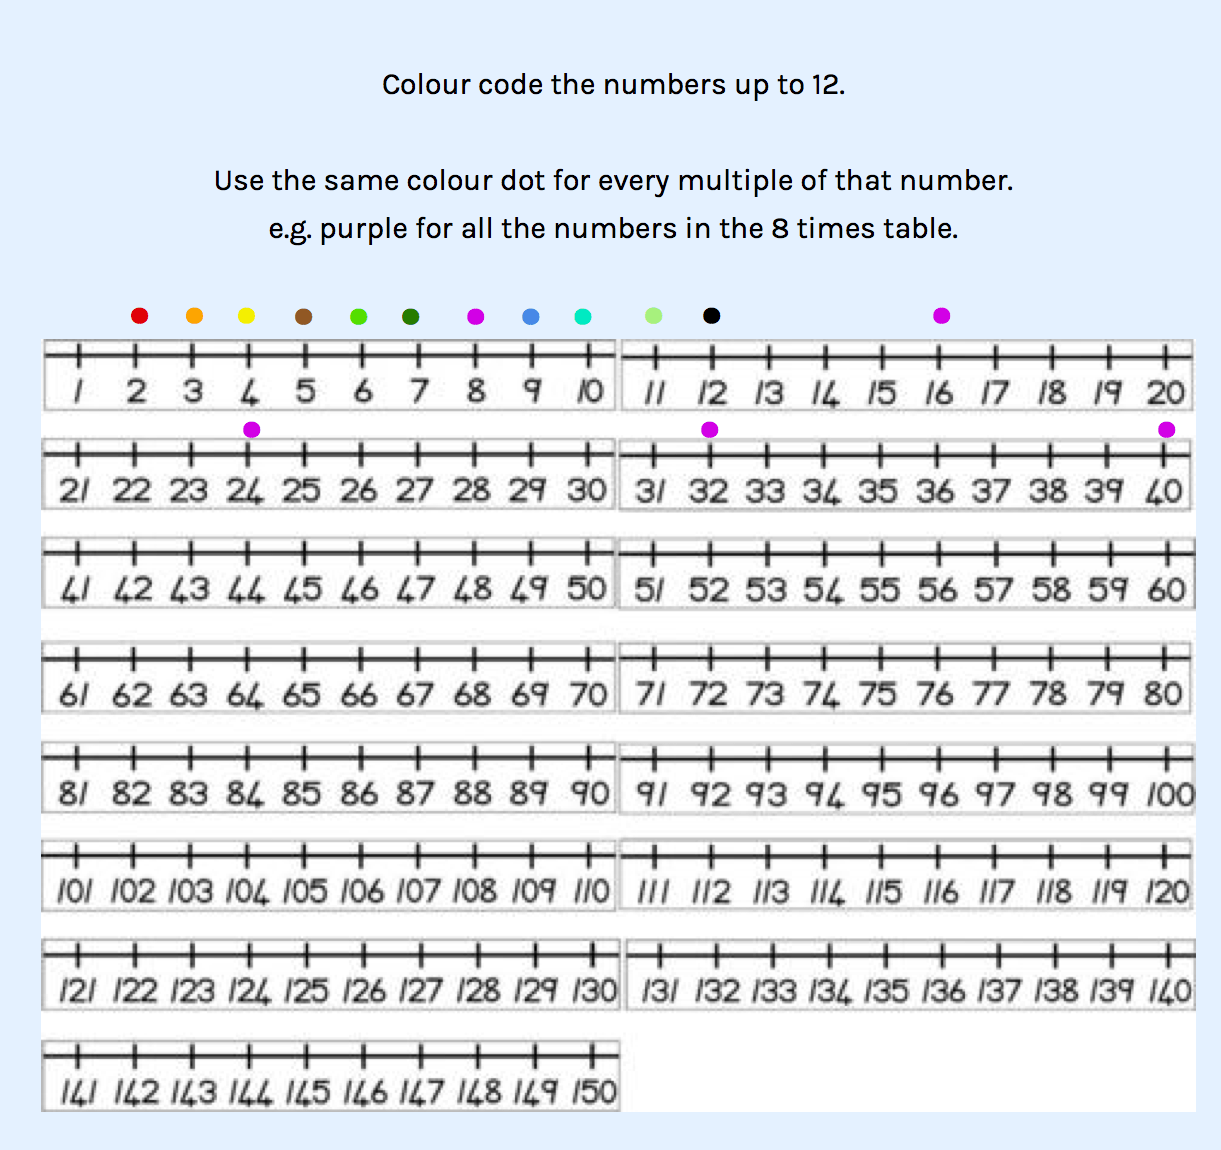 Finding Prime Numbers